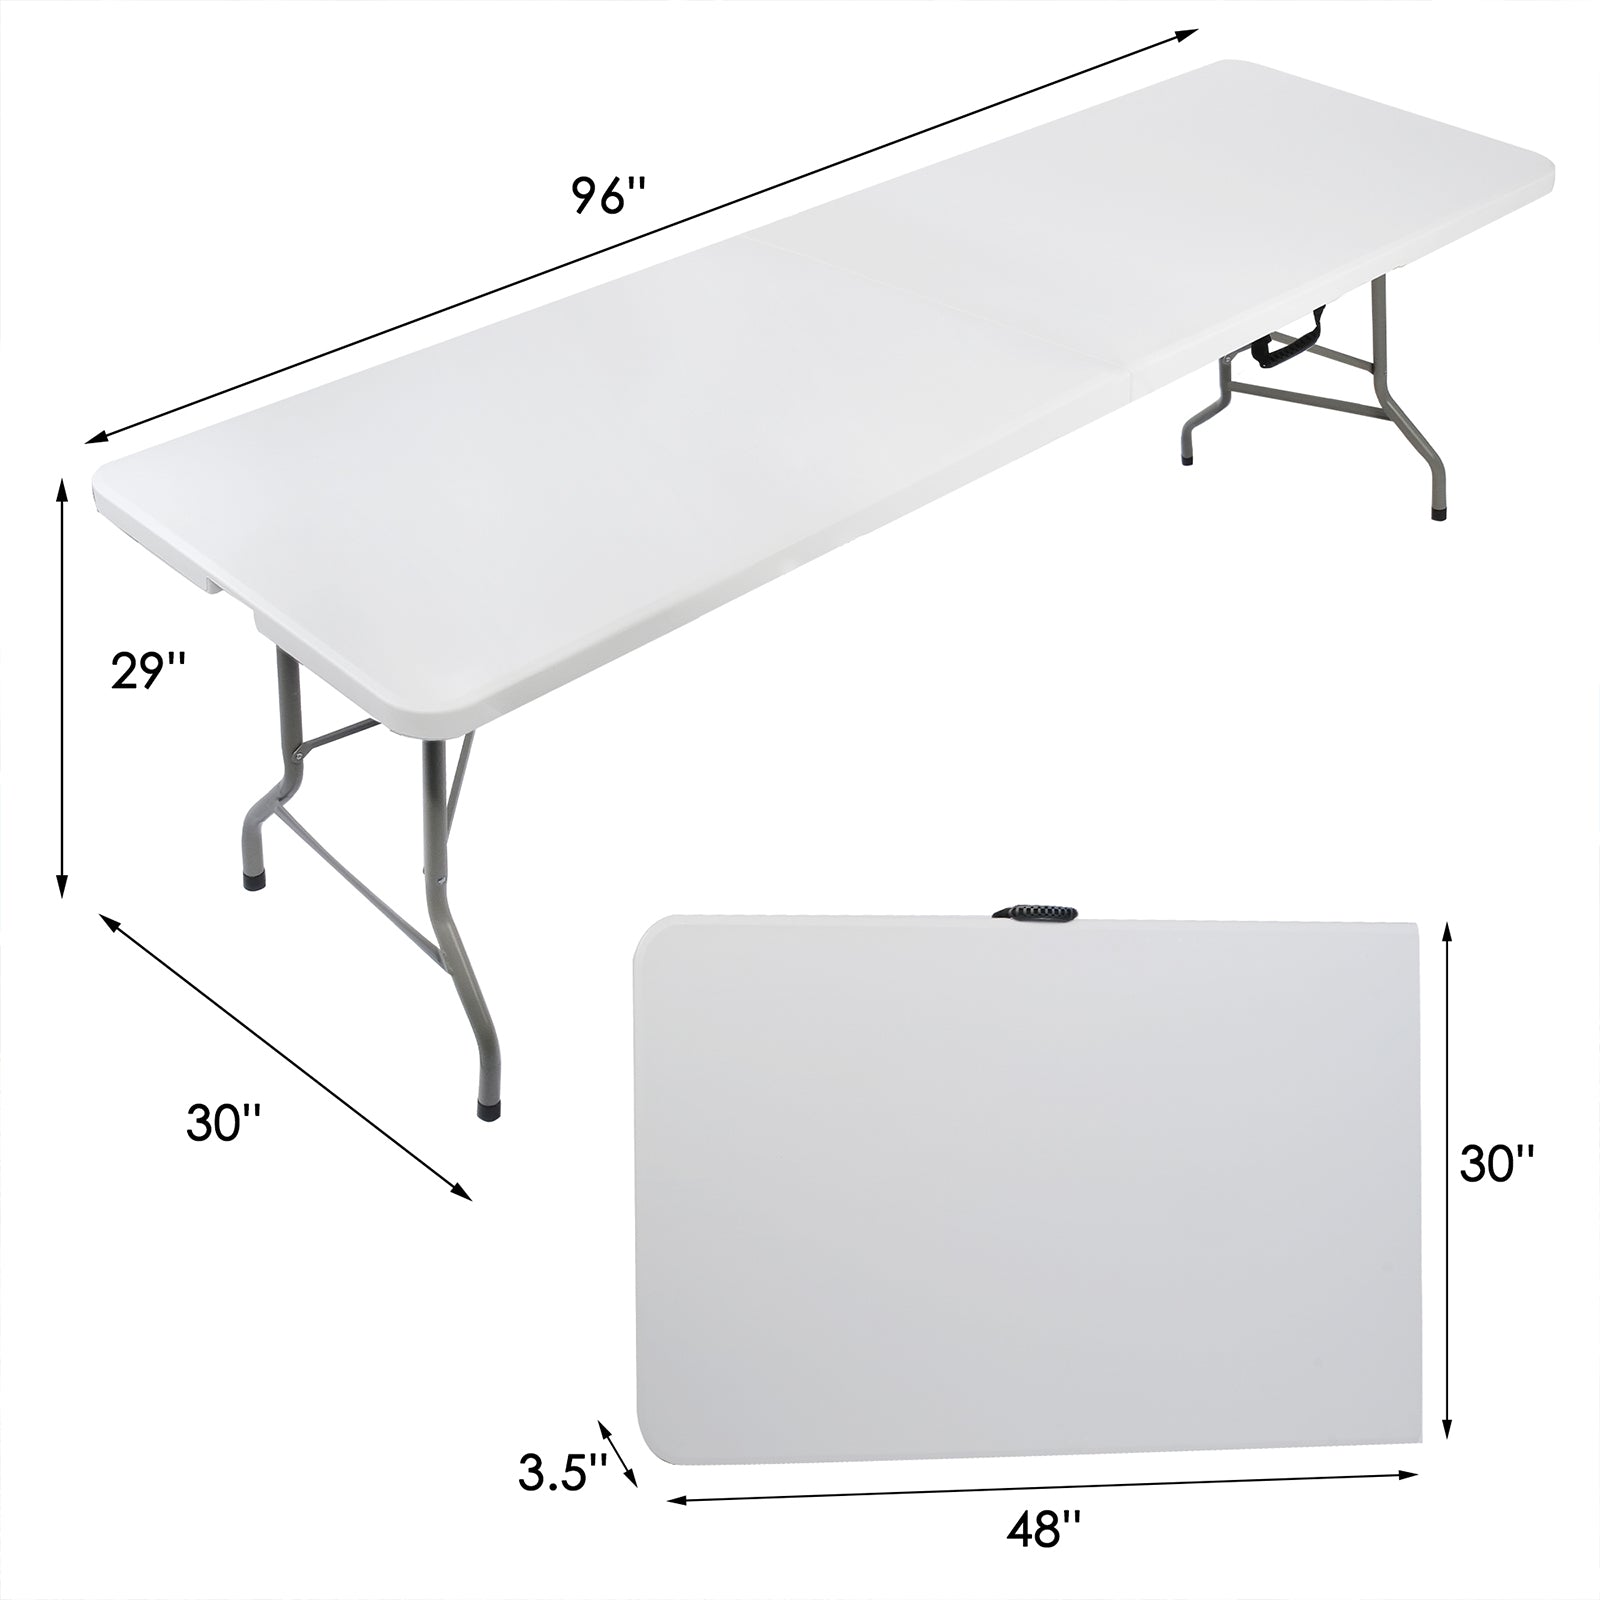 8ft Portable Folding Plastic Table for 8-10 Picnic Dining Table 96" with Carry Handle, White